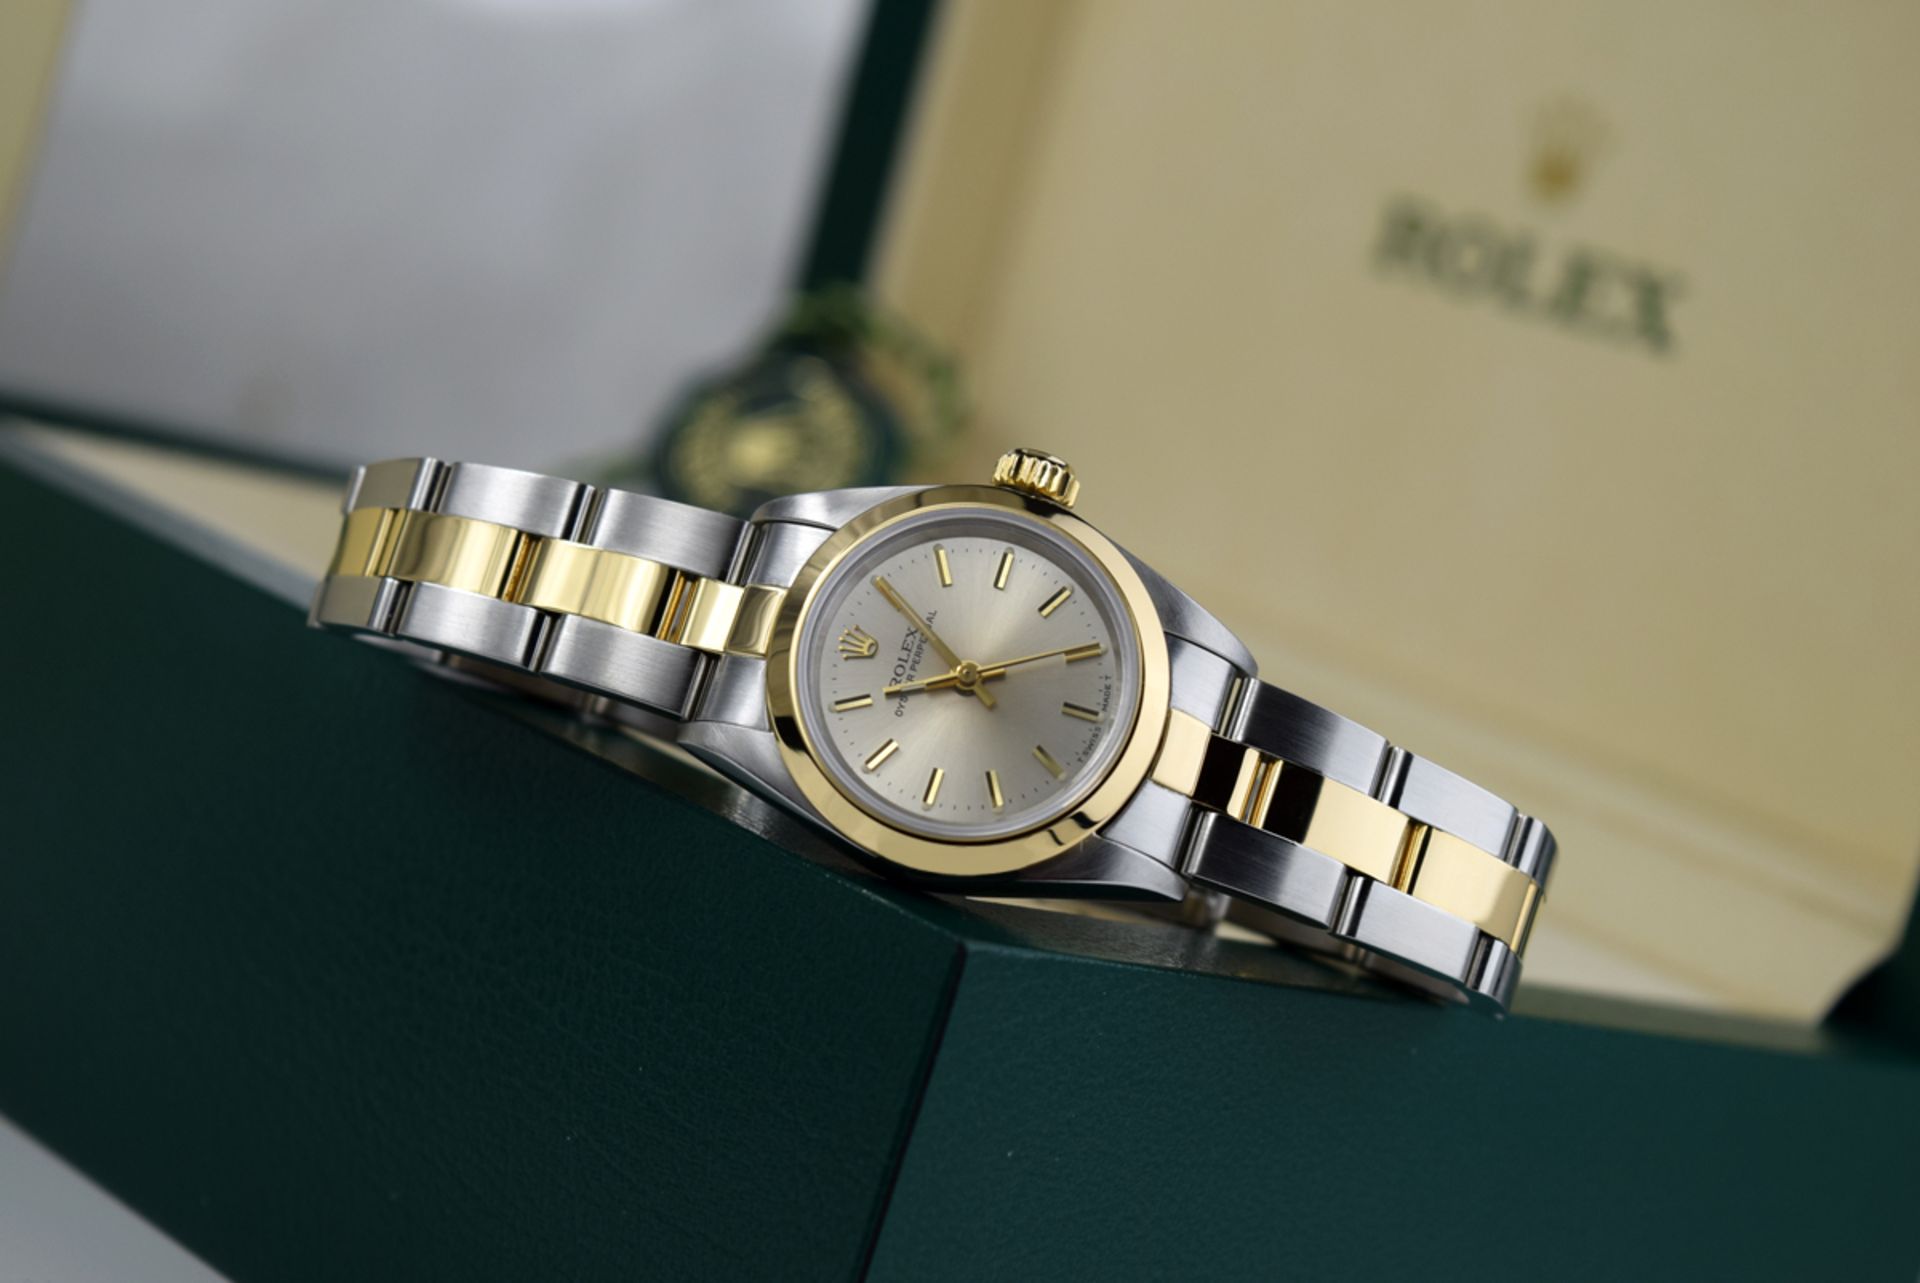 ROLEX Oyster Perpetual - 18k Gold & Steel - Light Champagne Dial - Image 8 of 10